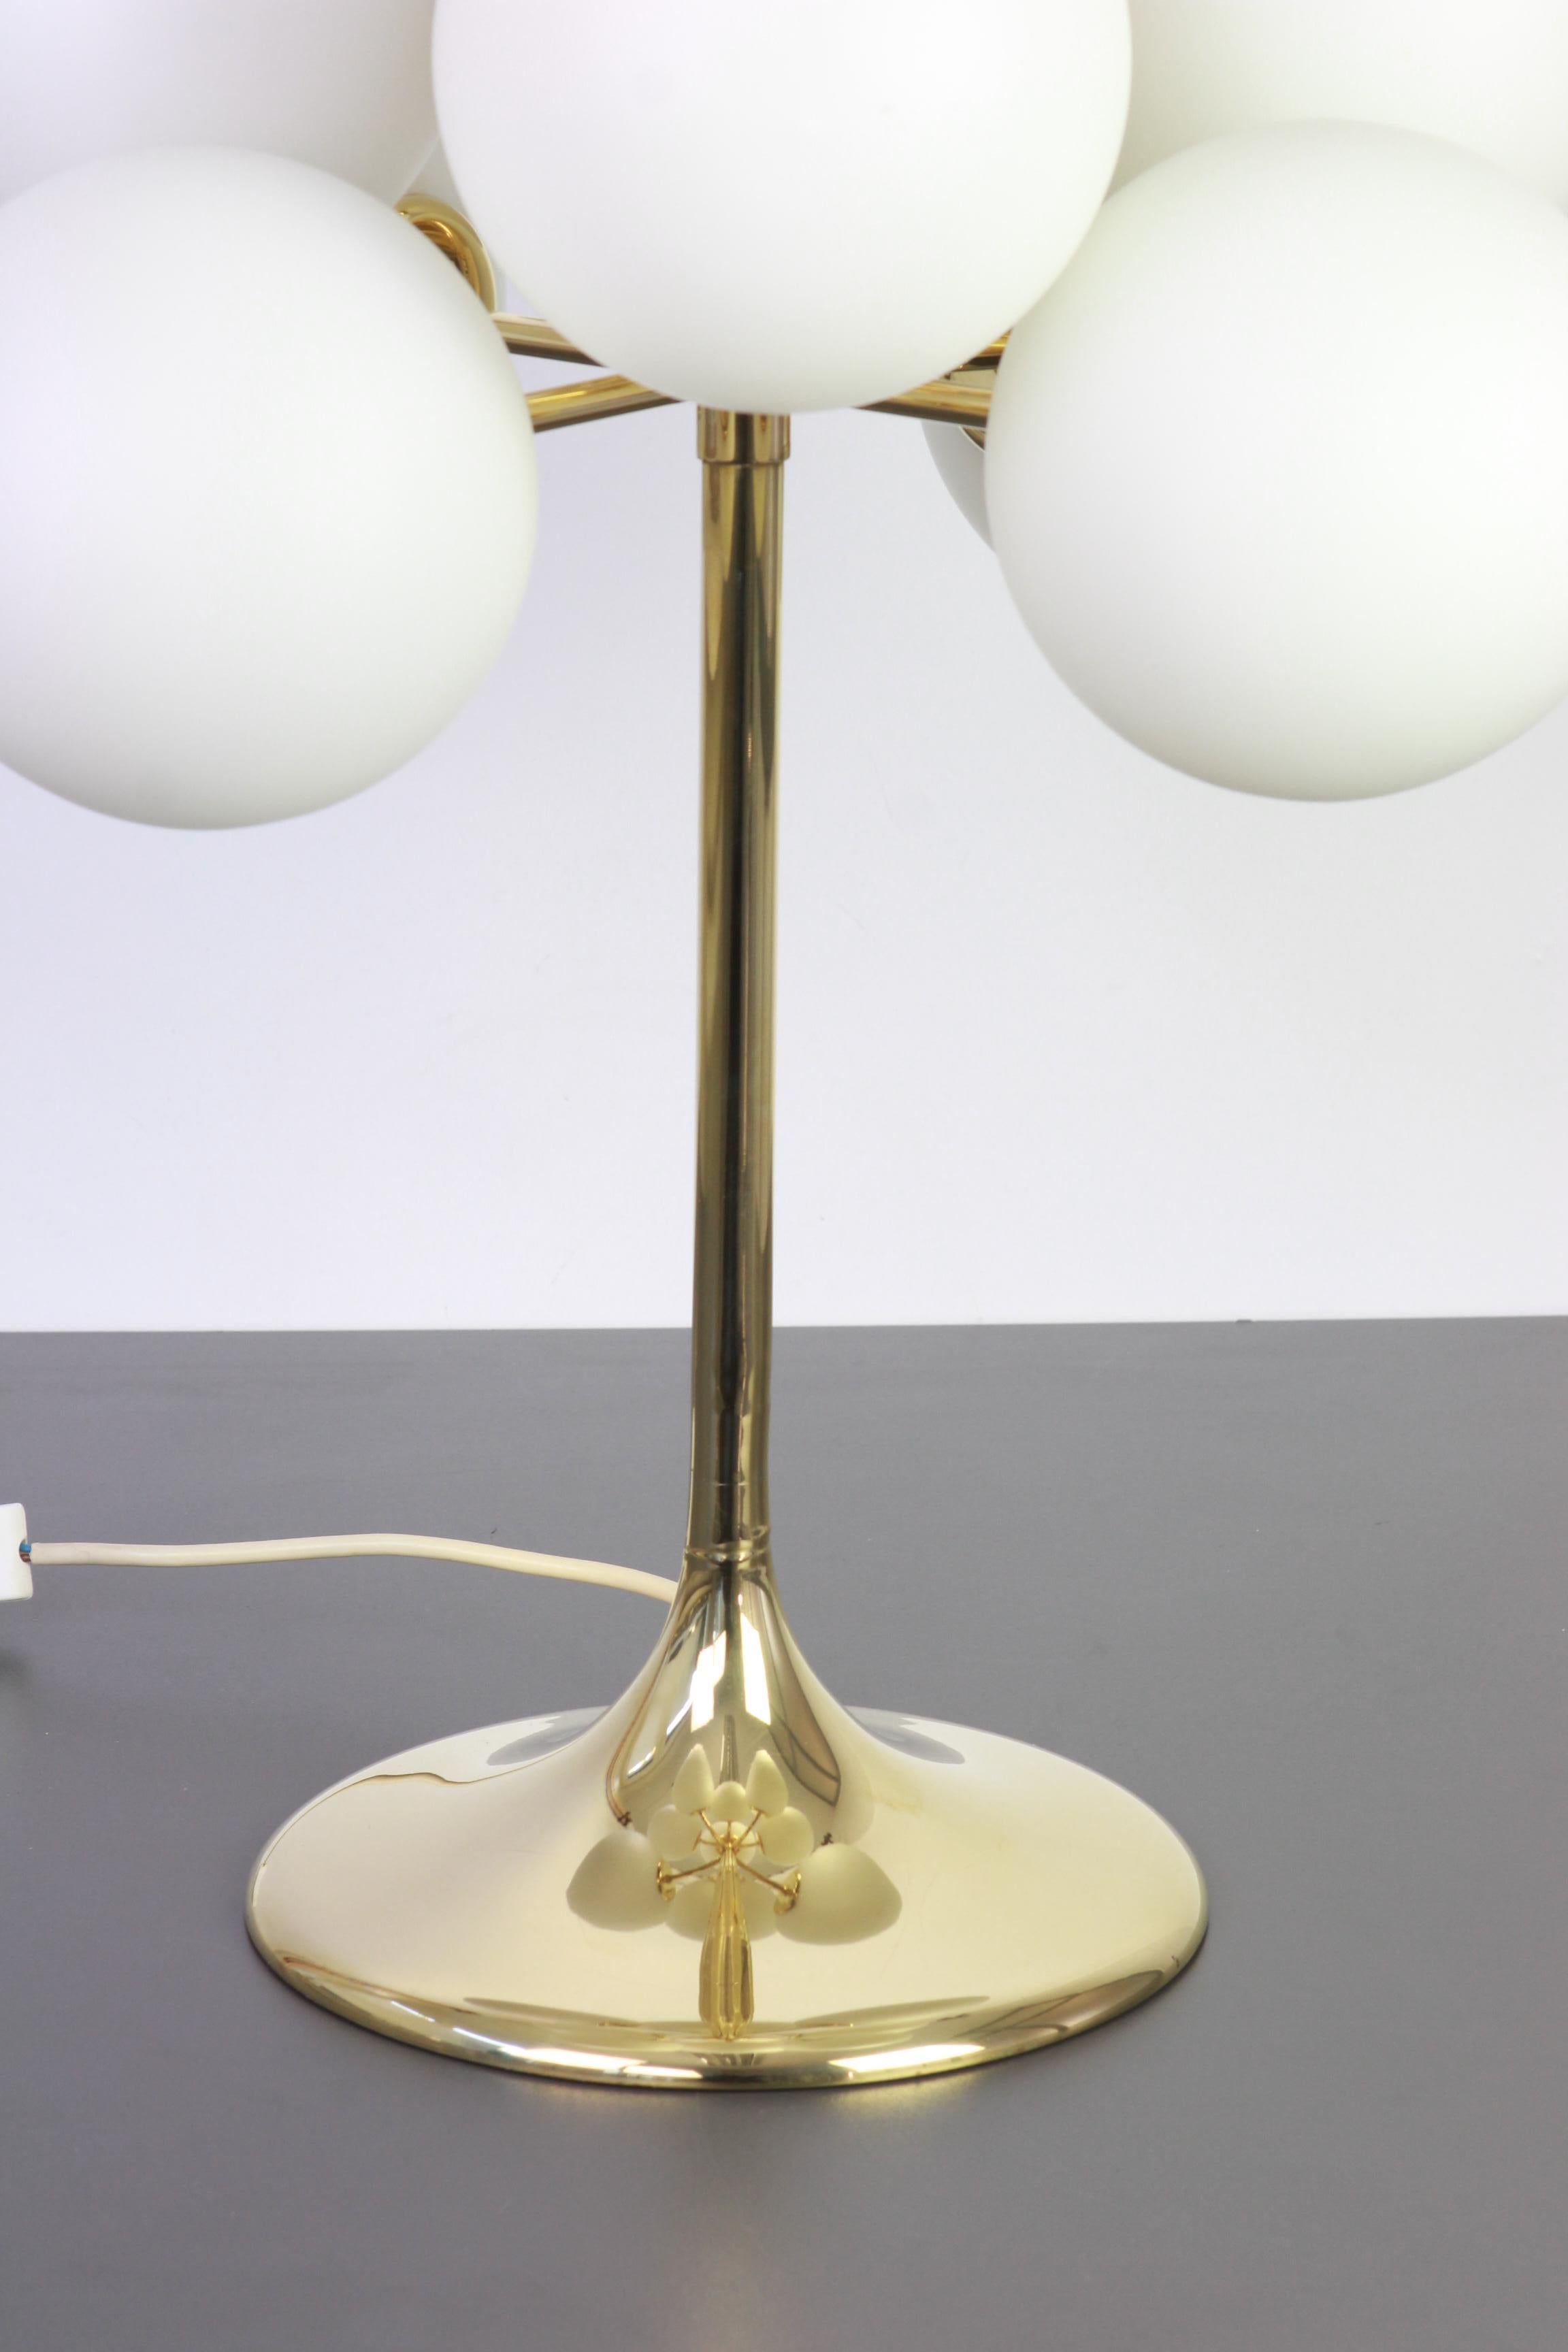 Atomic brass table lamp with nine-glass globes. The globes are hand blown and fitted with a screwing device.

High quality and in very good condition. Cleaned, well-wired and ready to use. 

The fixture requires 9 x E14 standard bulbs and is